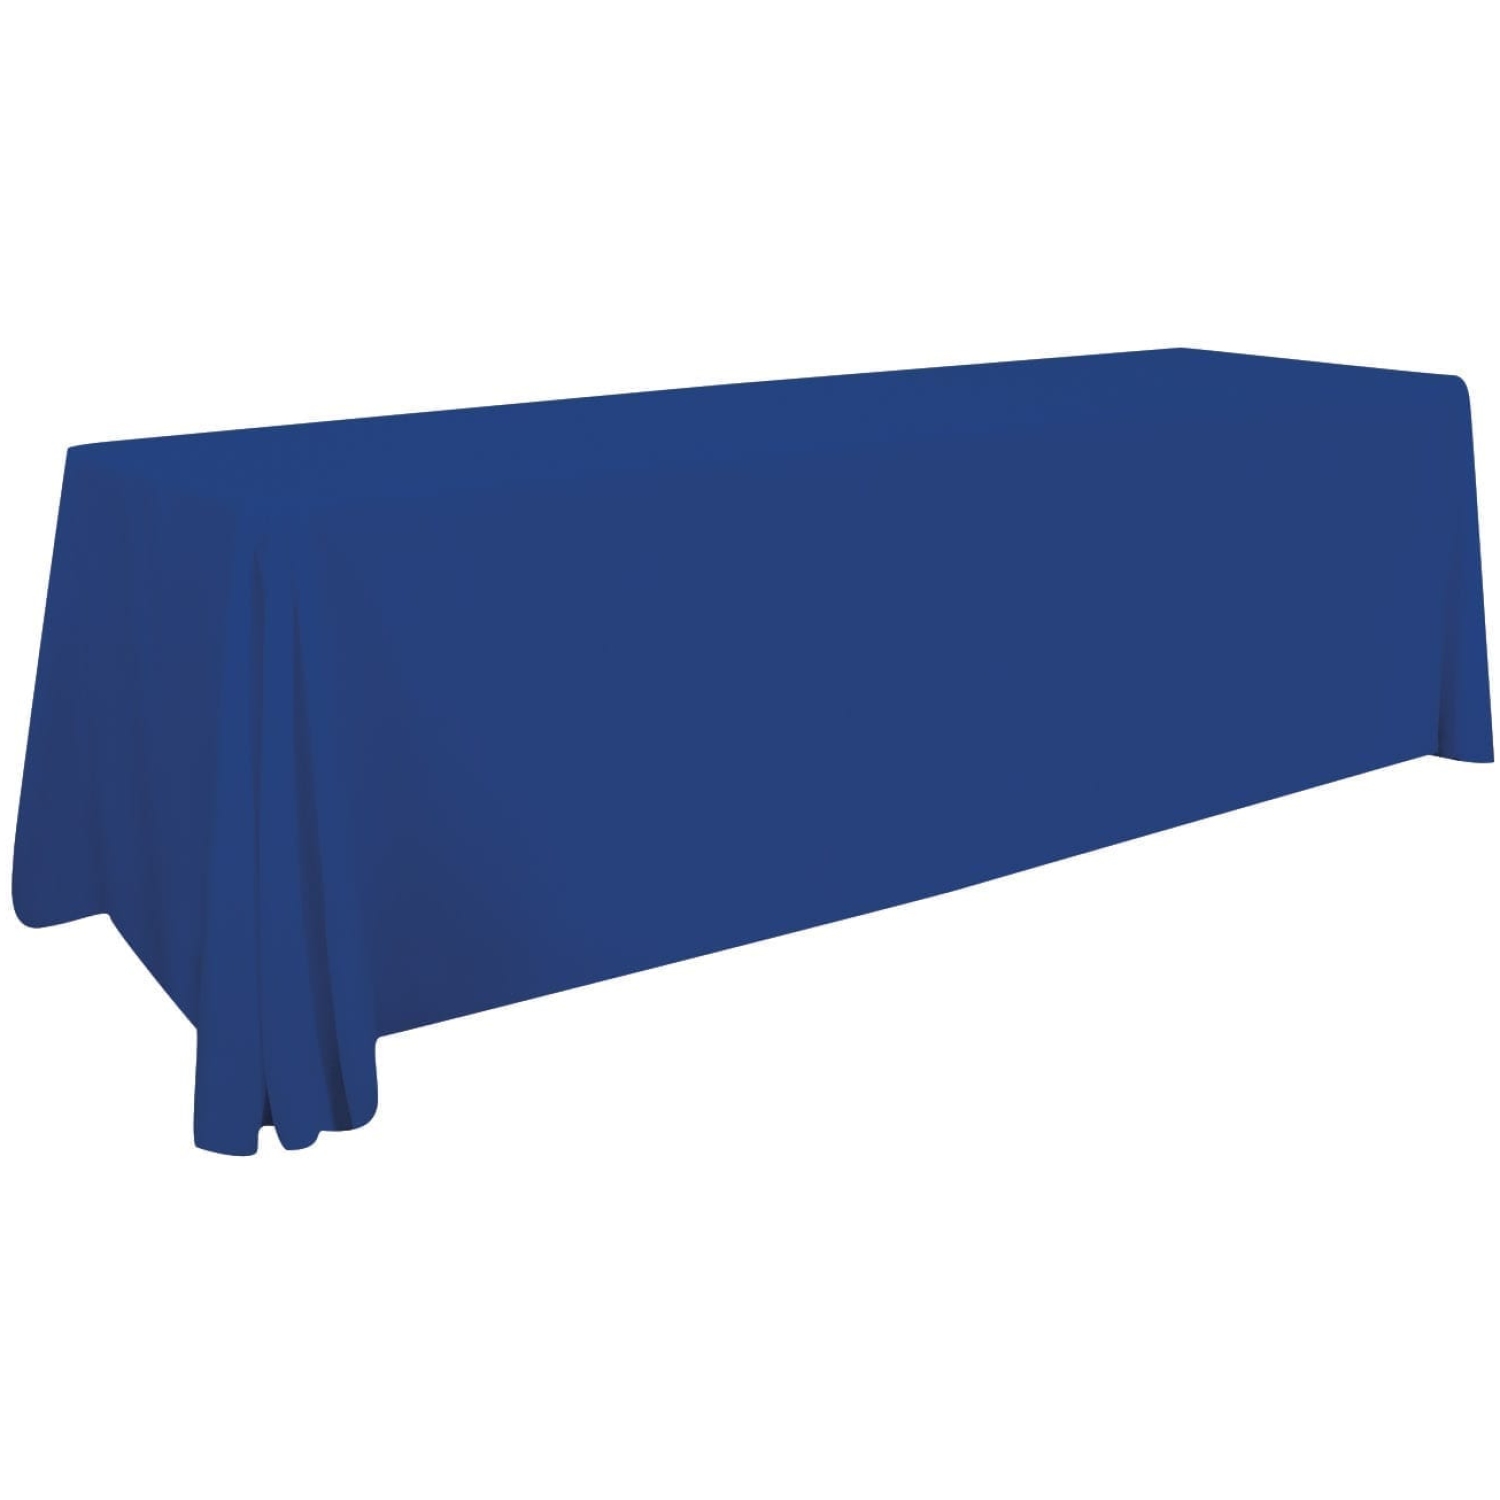 8′ Value Lite Table Throw (unimprinted)